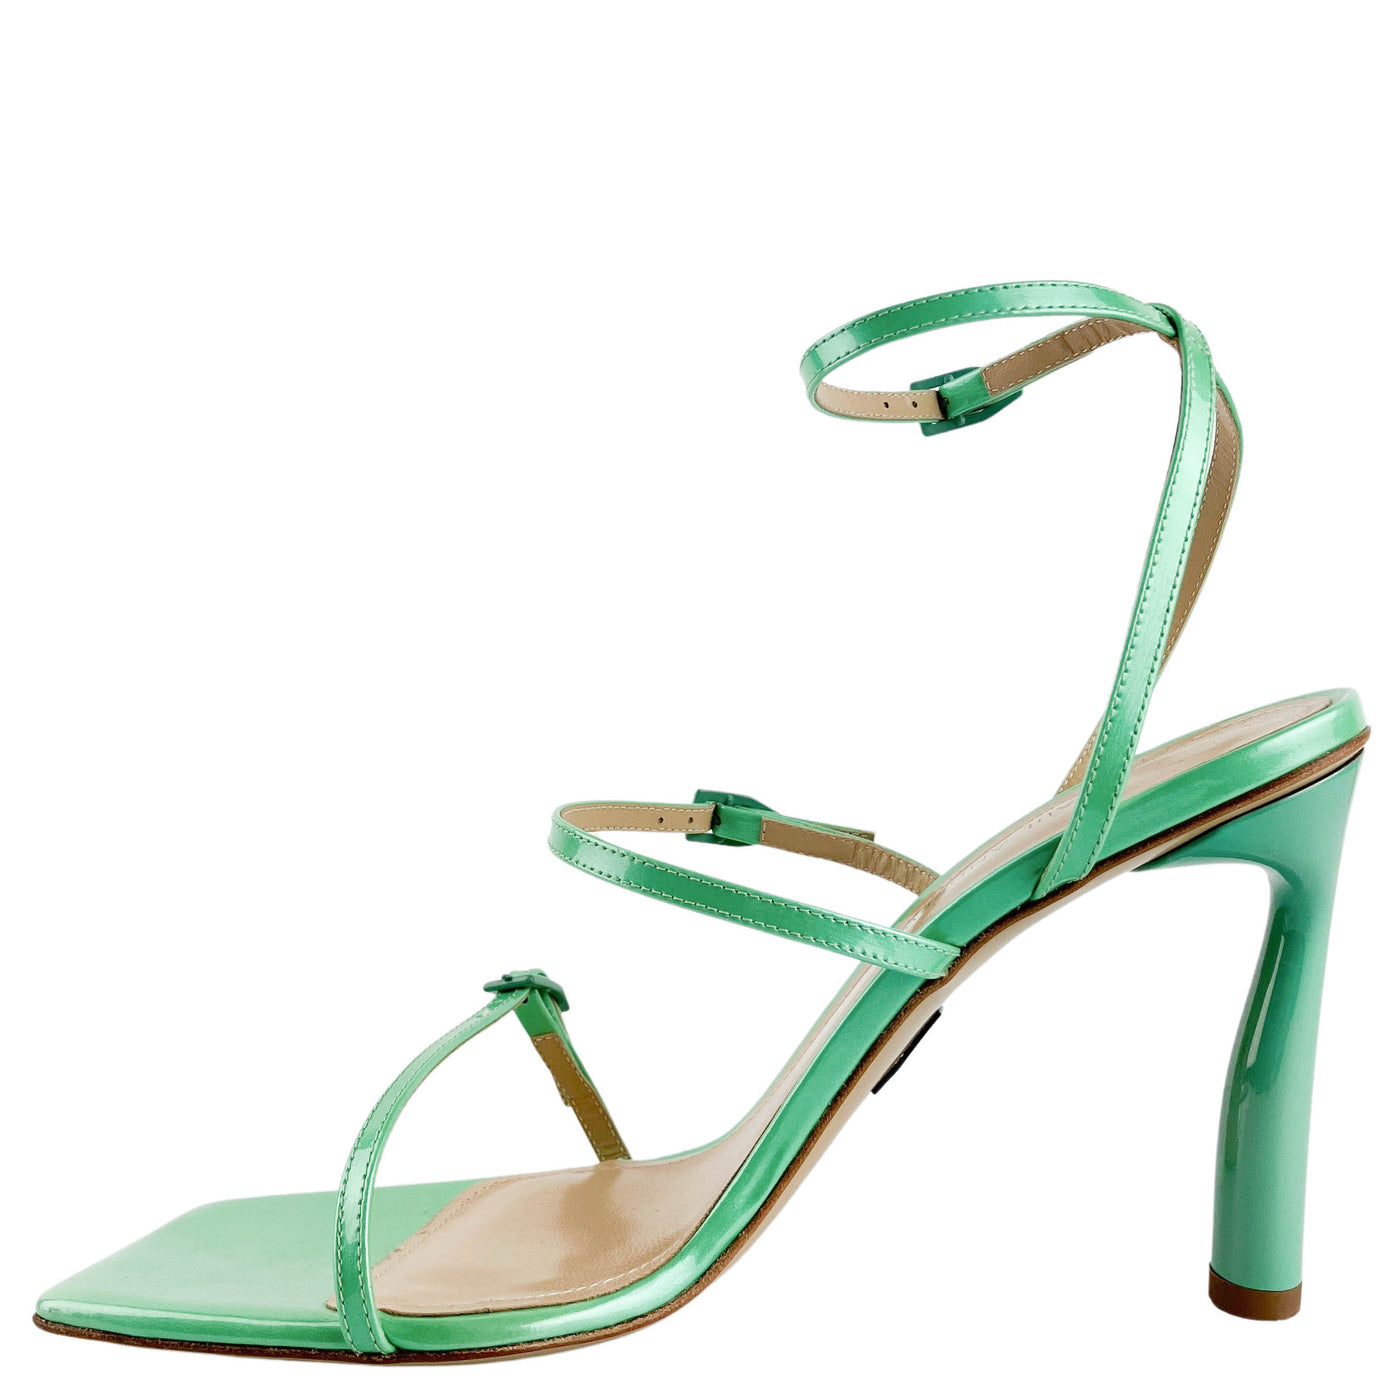 Paul Andrew Slinky Patent Sandals in Aqua - Discounts on Paul Andrew at UAL